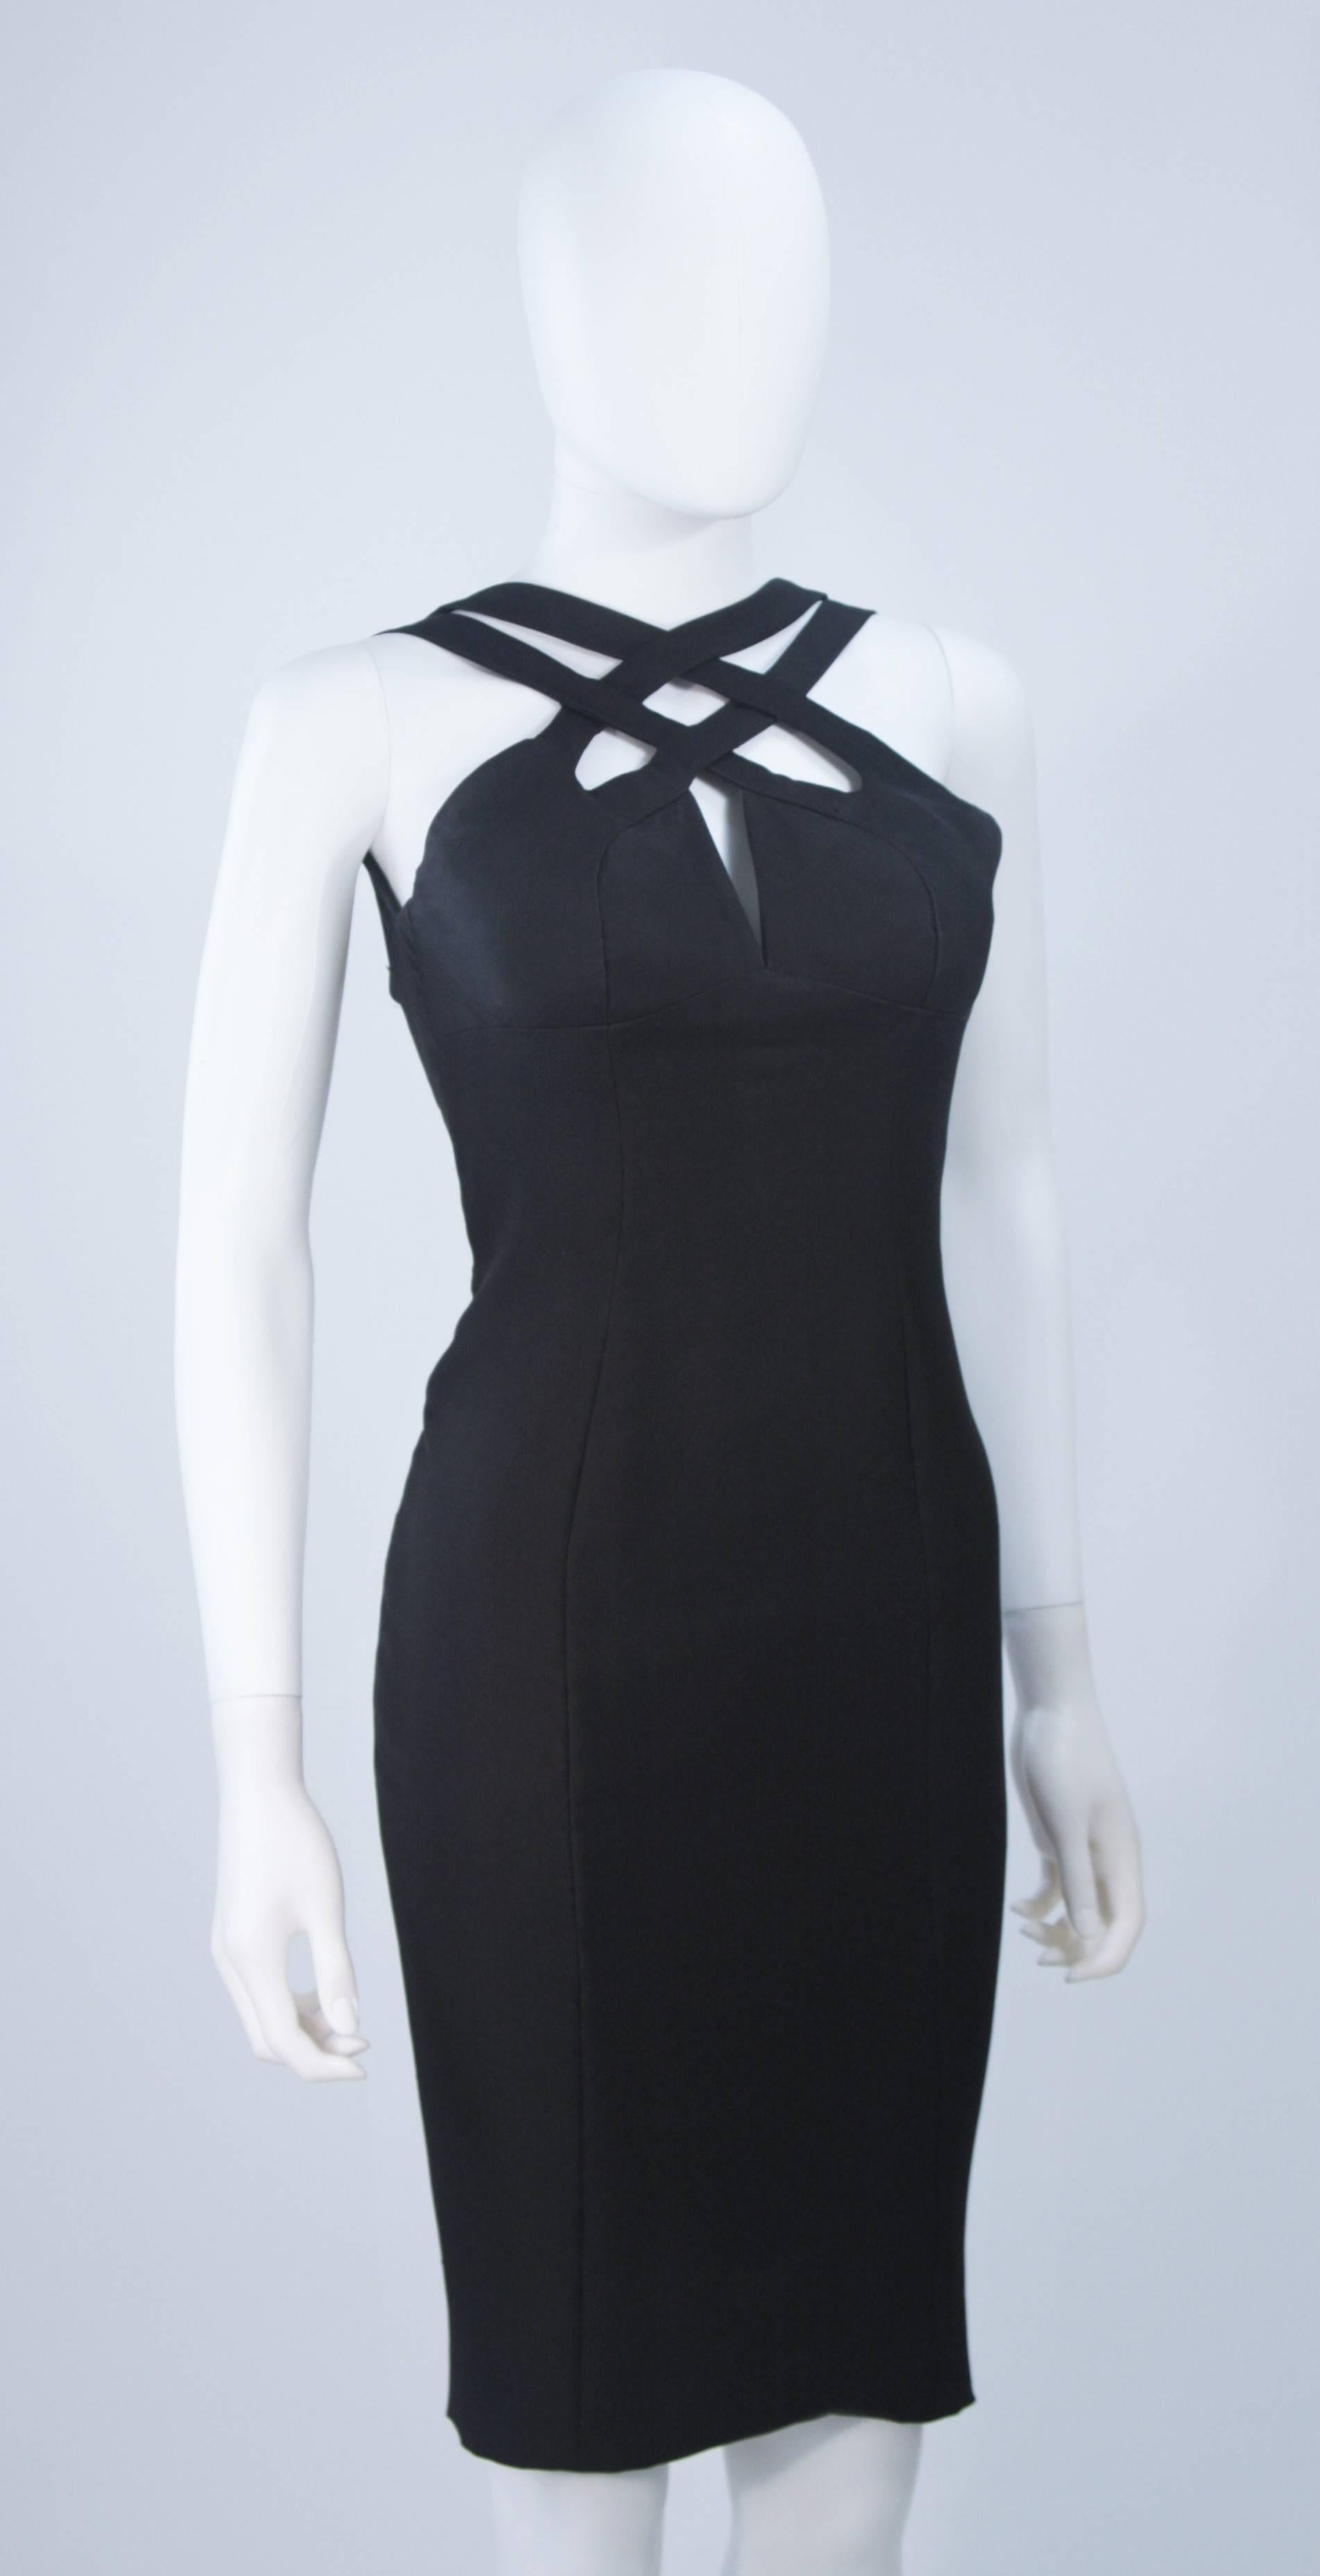 Women's ELIZABETH MASON COUTURE Silk Criss Cross Cocktail Dress Made to Measure For Sale